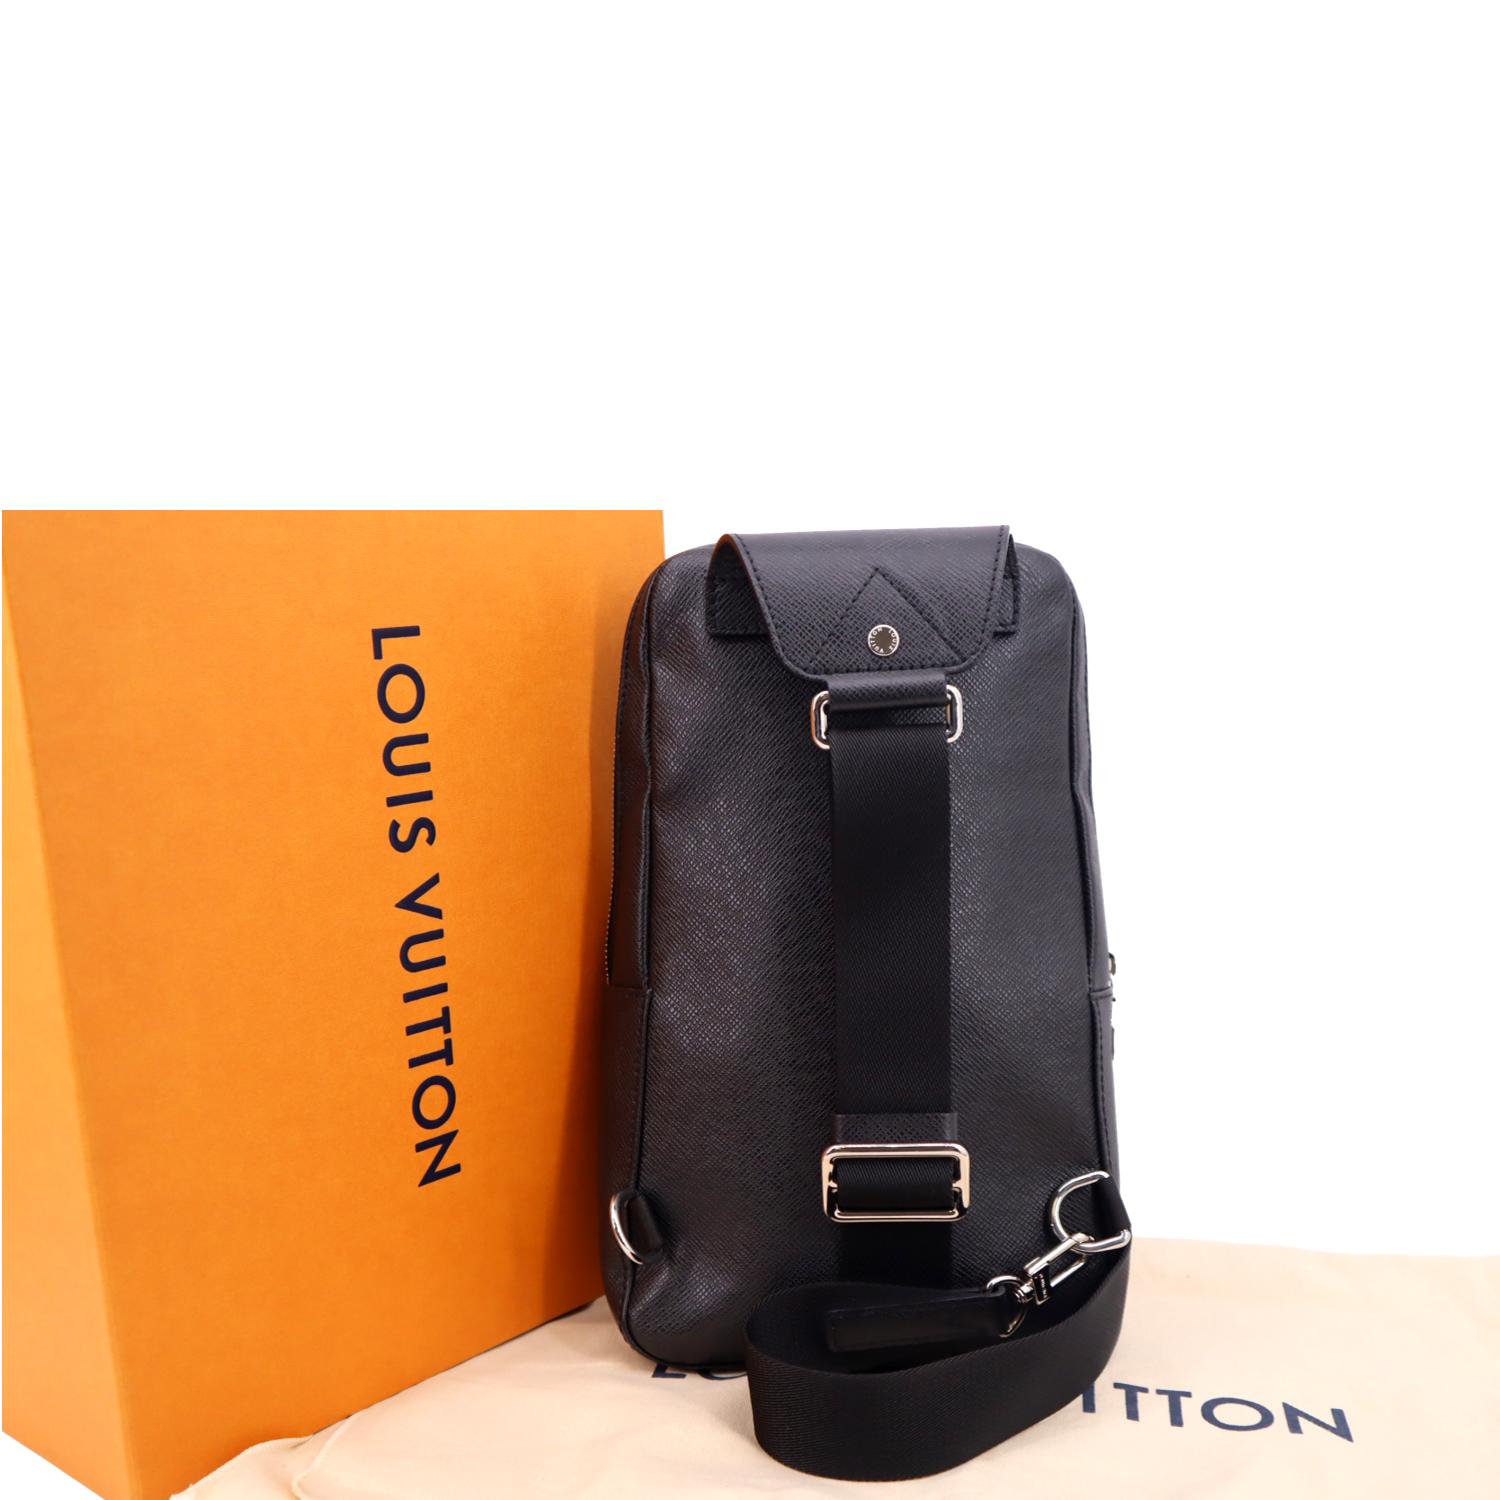 Avenue sling leather backpack Louis Vuitton Black in Leather